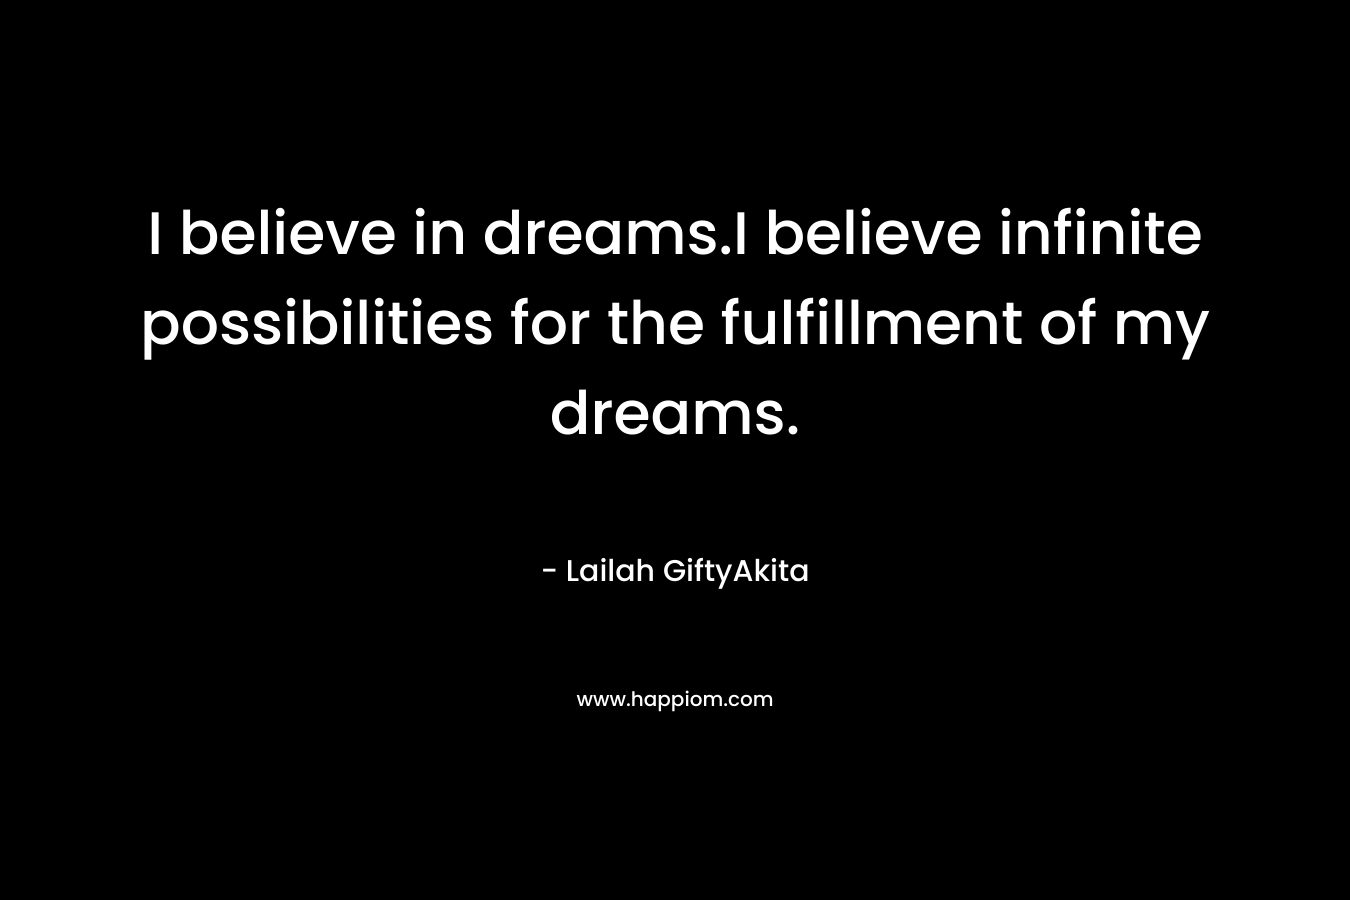 I believe in dreams.I believe infinite possibilities for the fulfillment of my dreams. – Lailah GiftyAkita